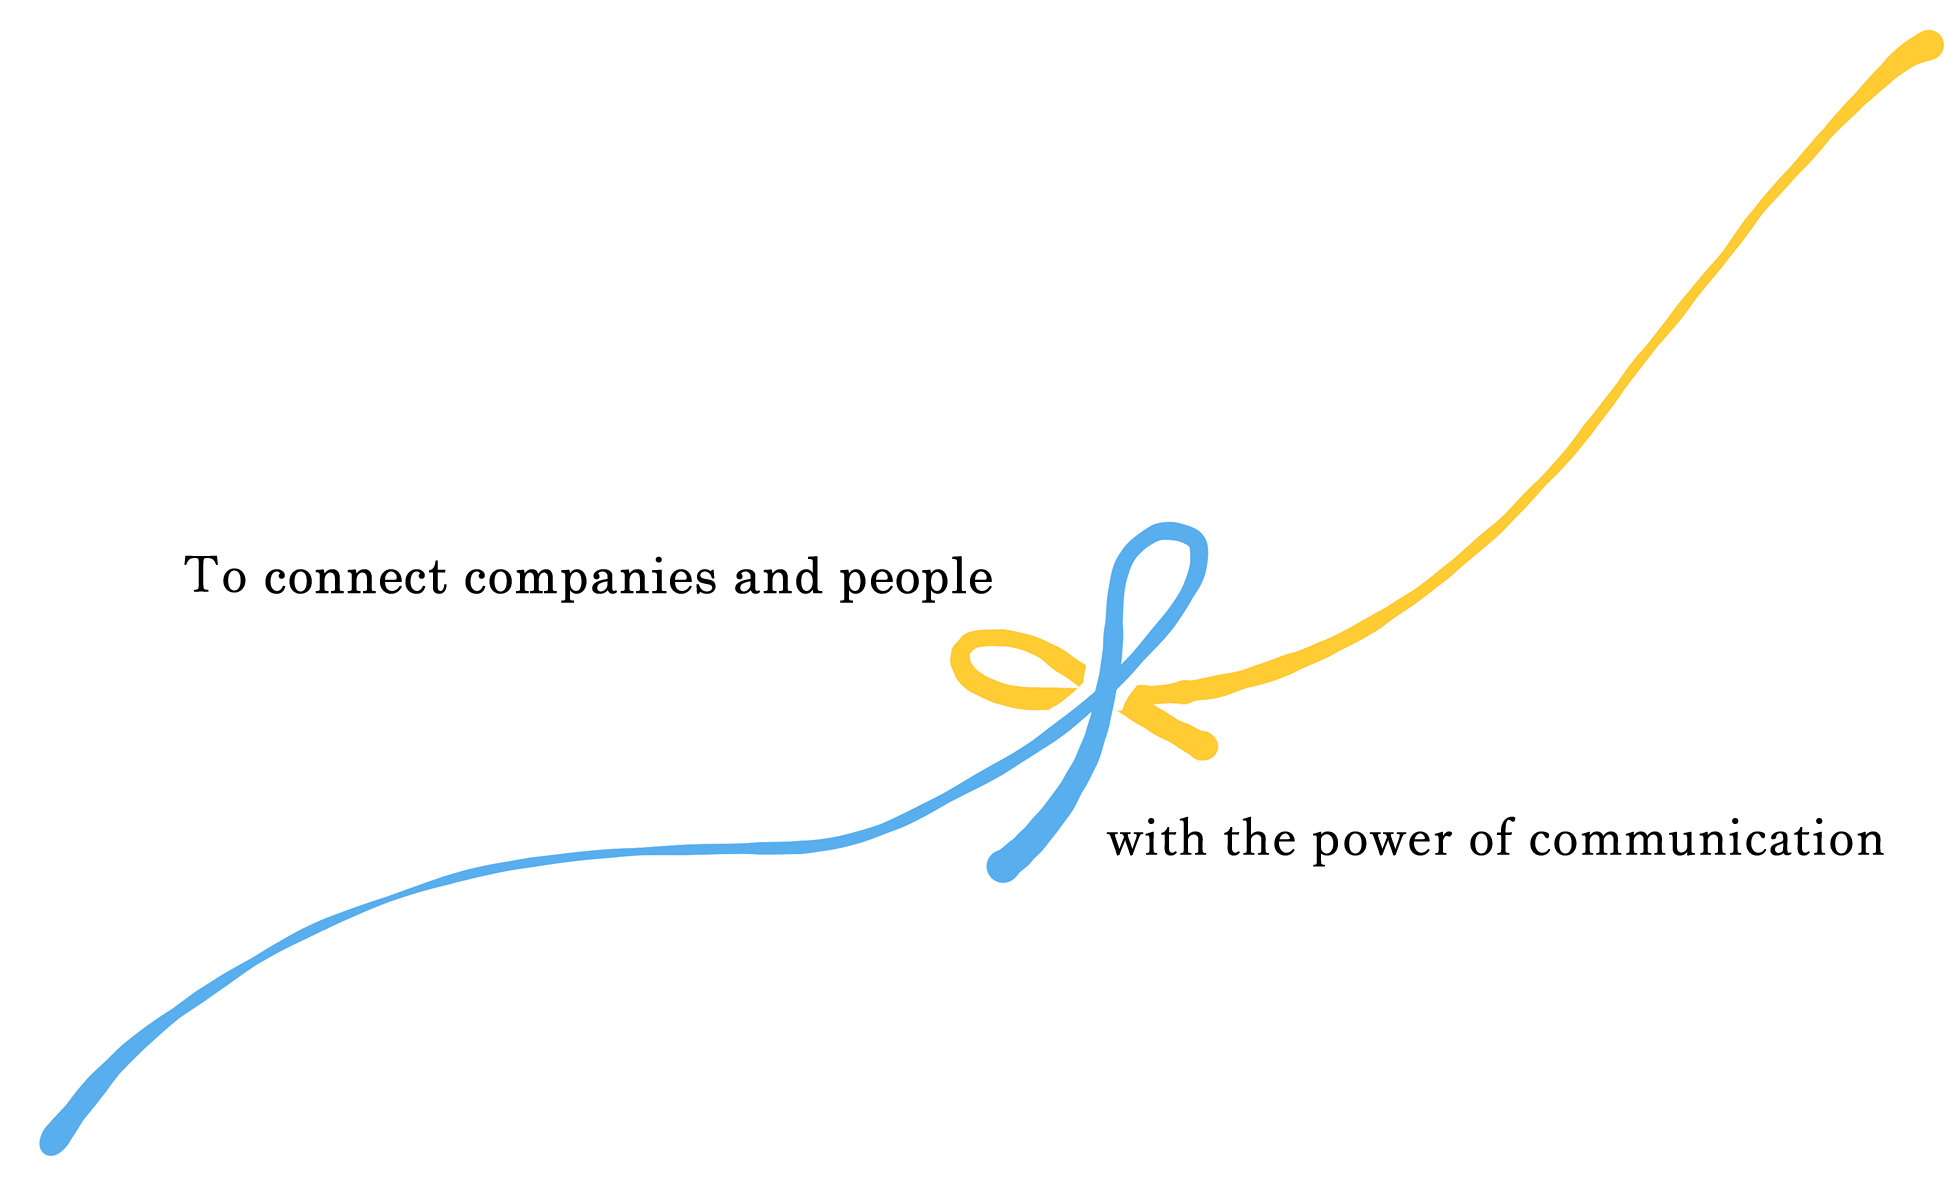 To connect companies and people with the power of communication